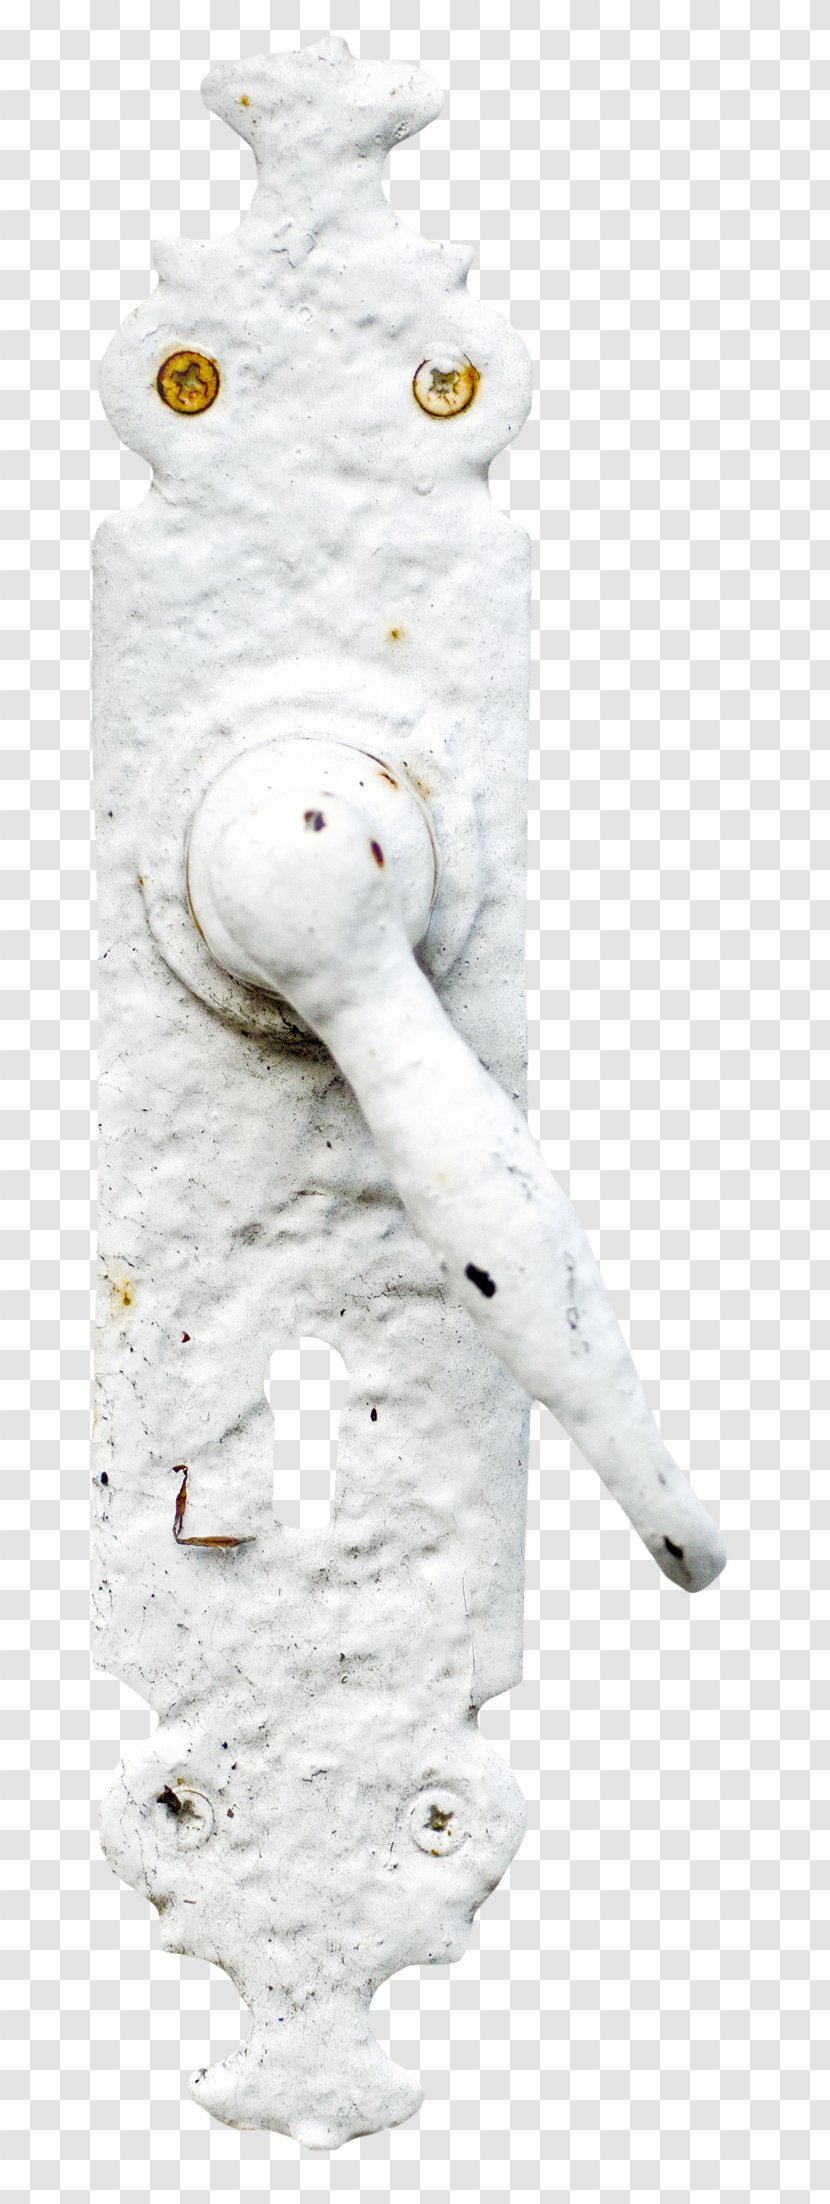 Doll - White - Stones Transparent PNG